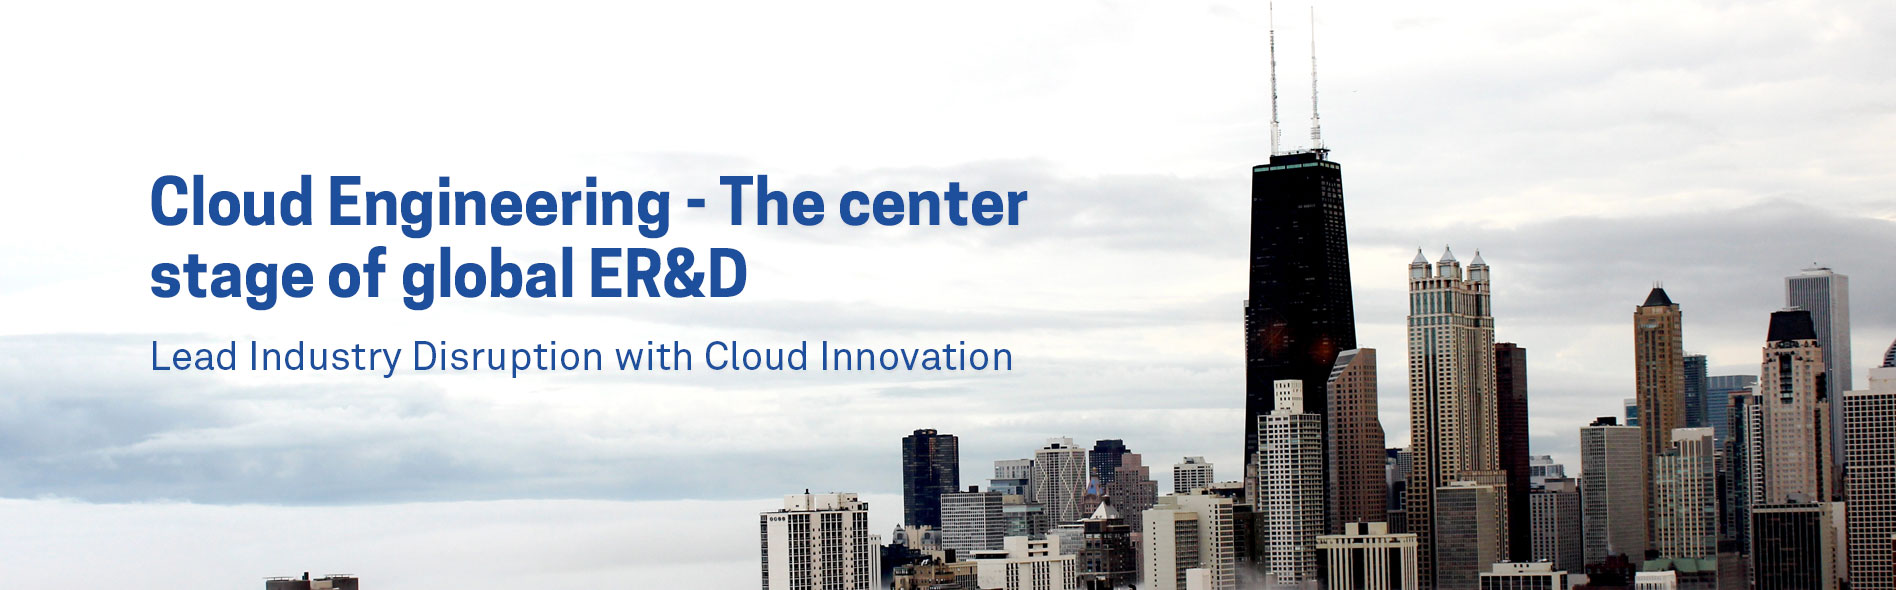 Cloud Engineering – The center stage of global ER&D